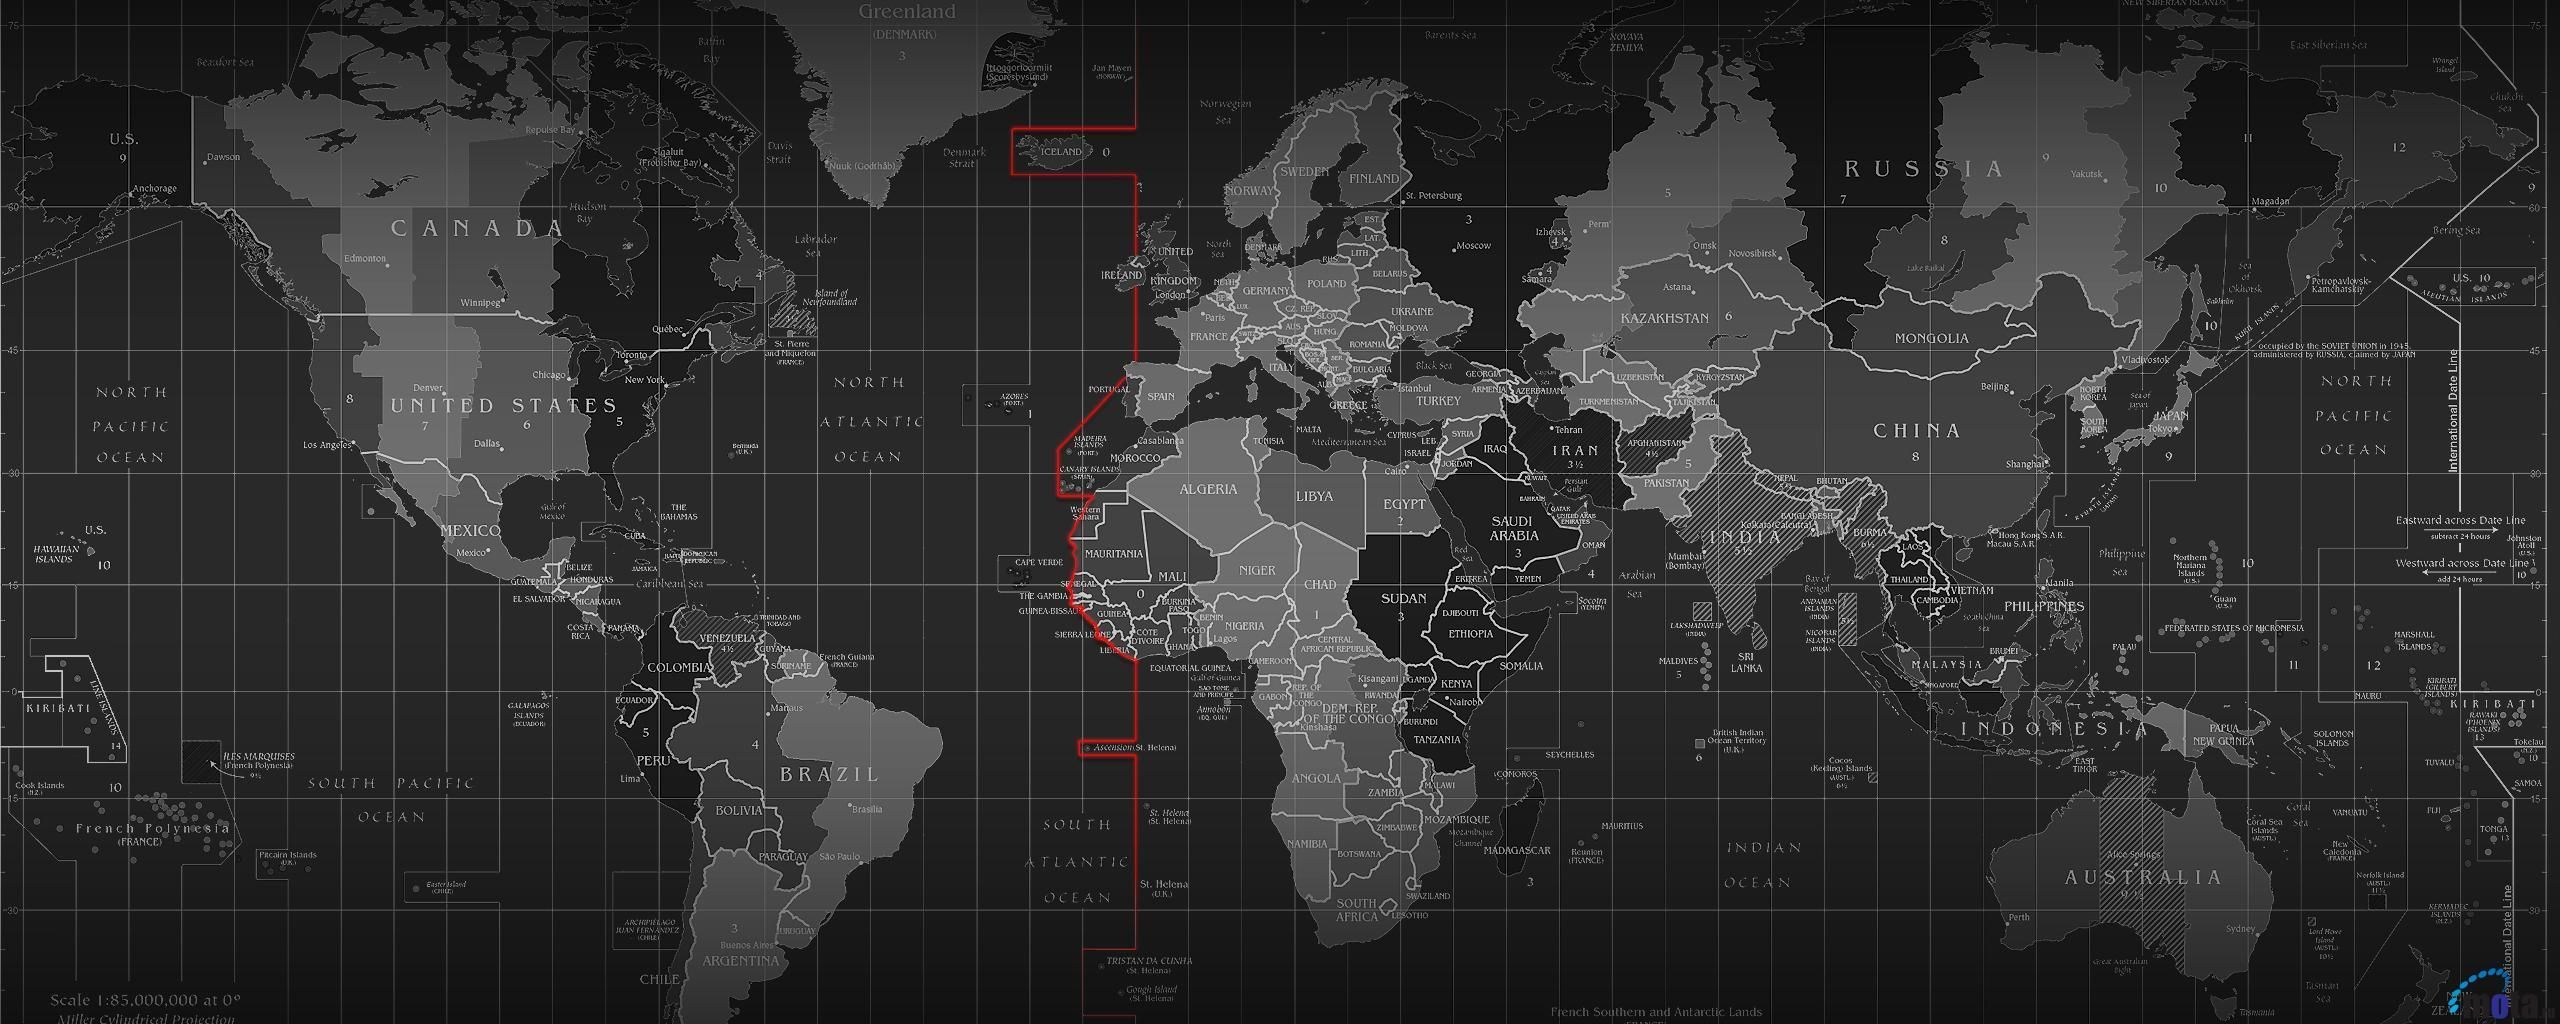 Download Wallpaper World Map with Time Zones. (2560 x 1024 Dual ...